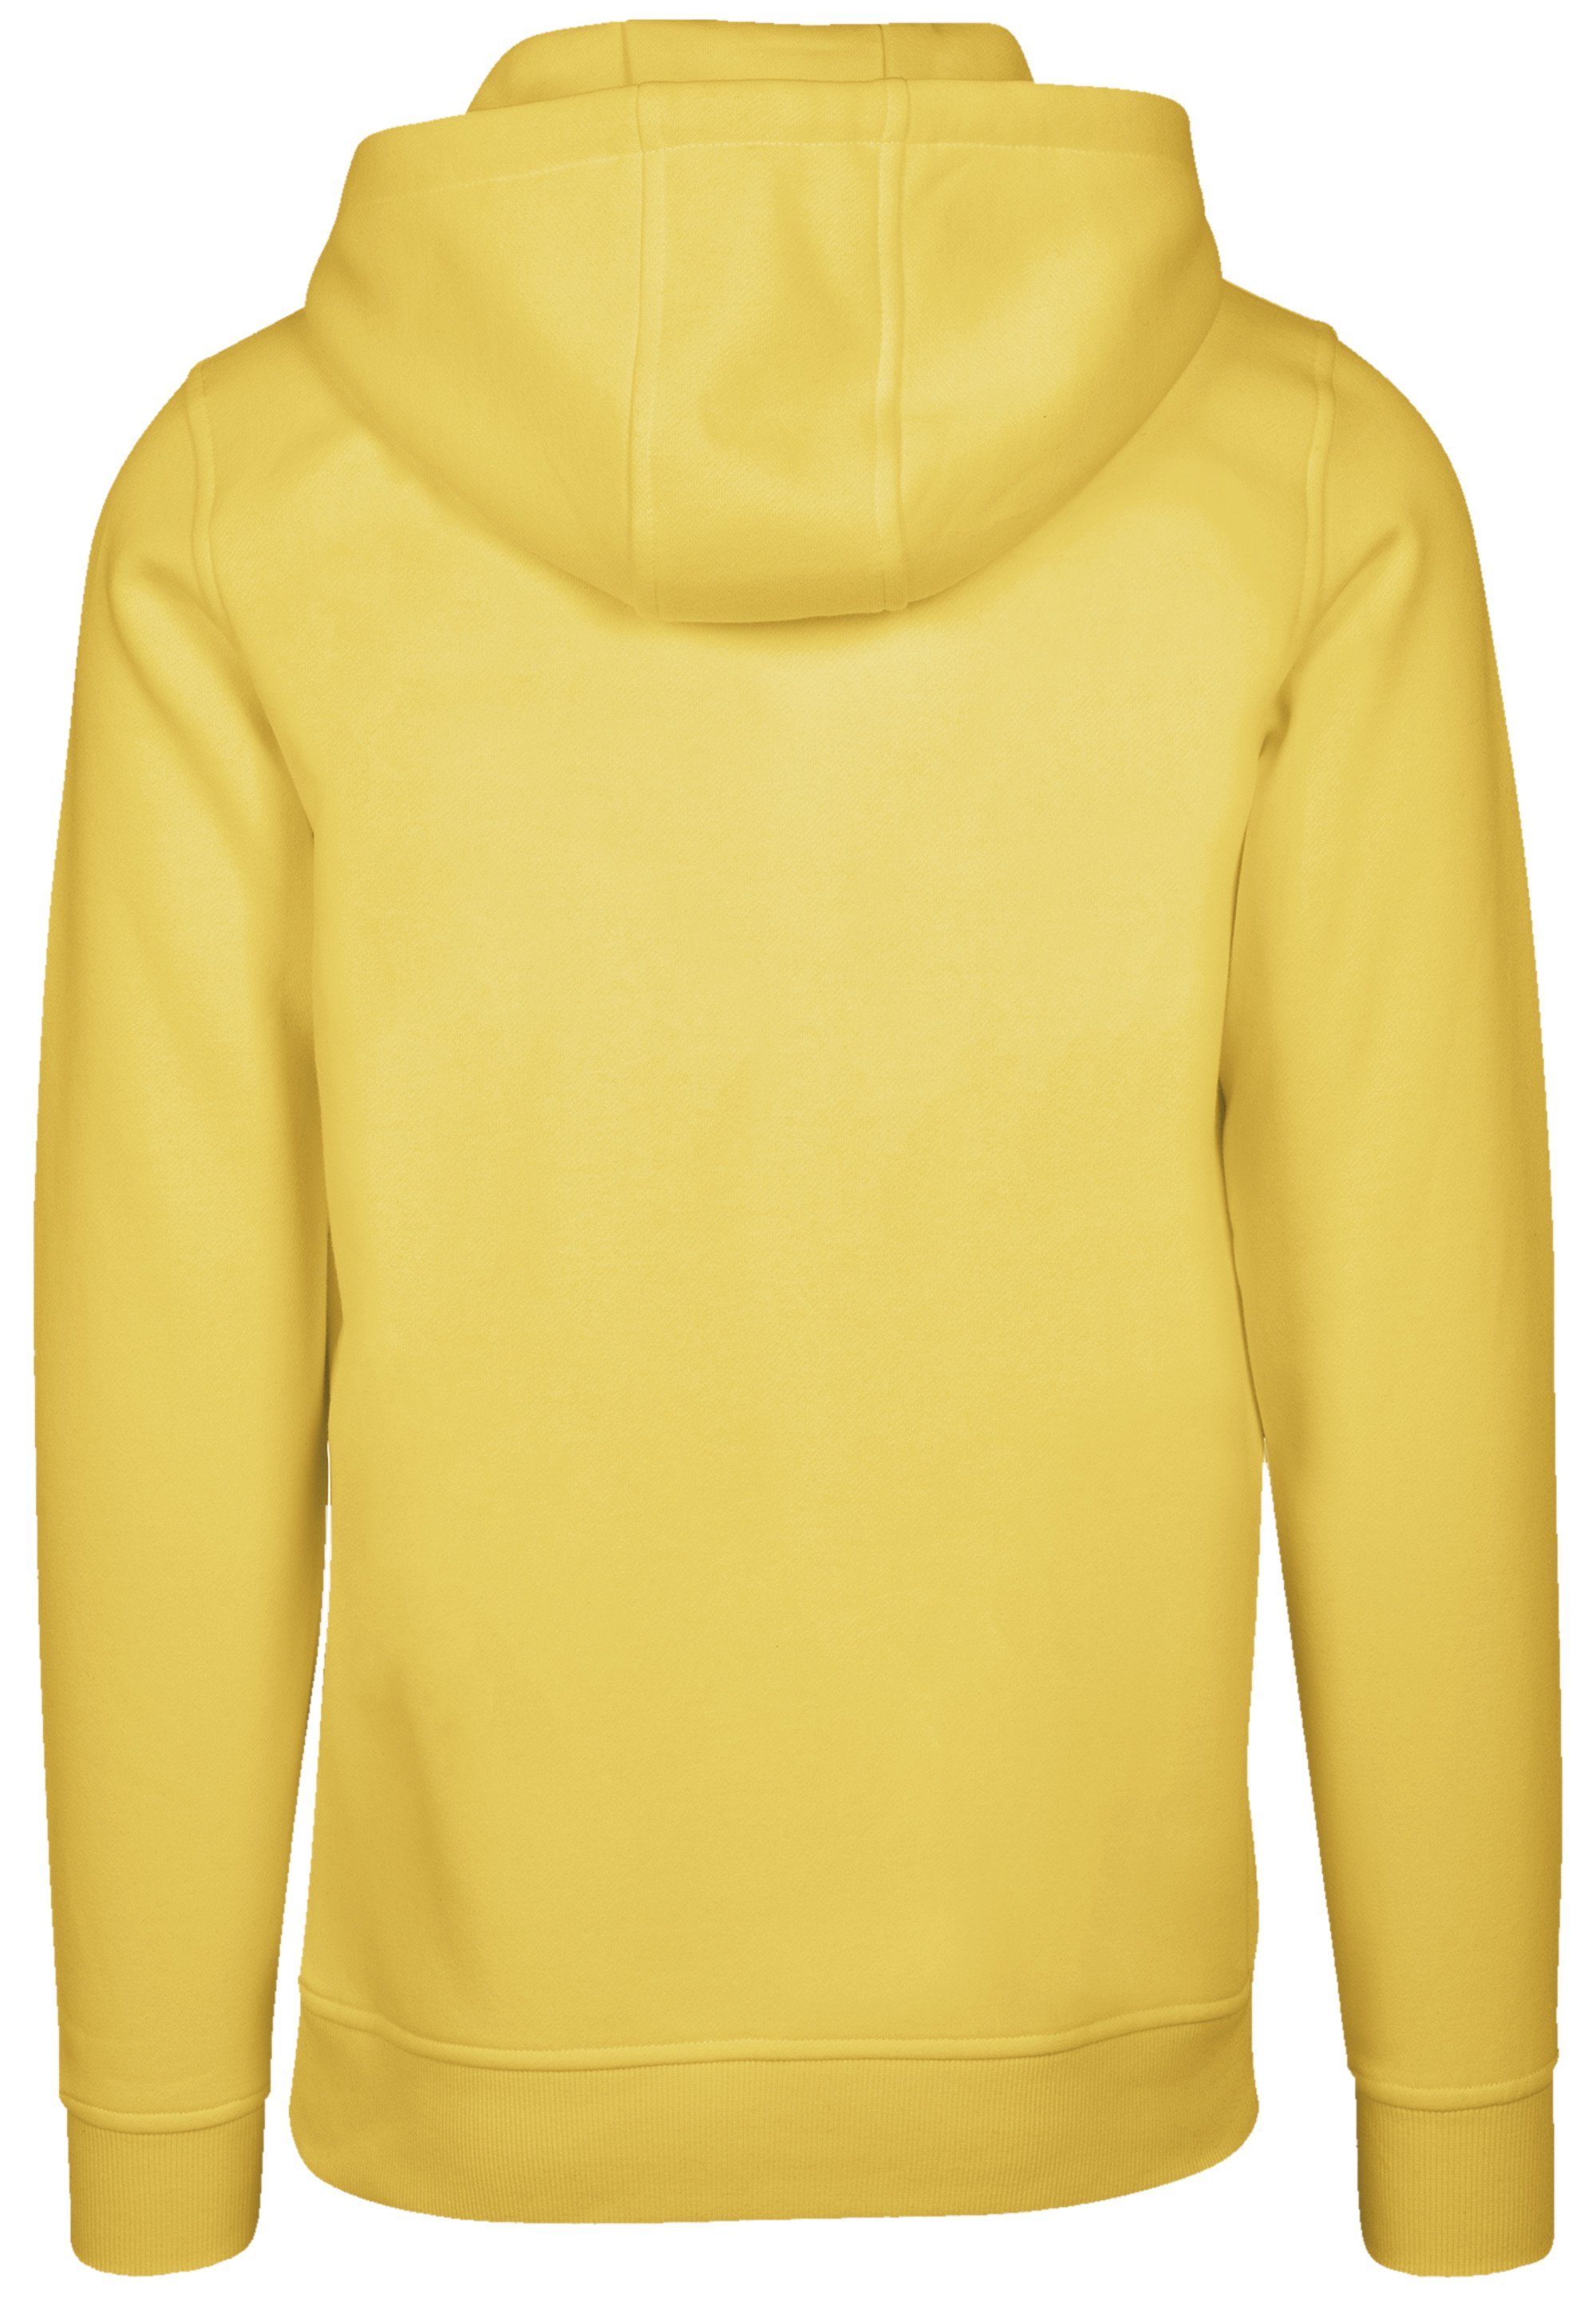 F4NT4STIC Kapuzenpullover world Hoodie, taxi the Warm, Bequem yellow Discover